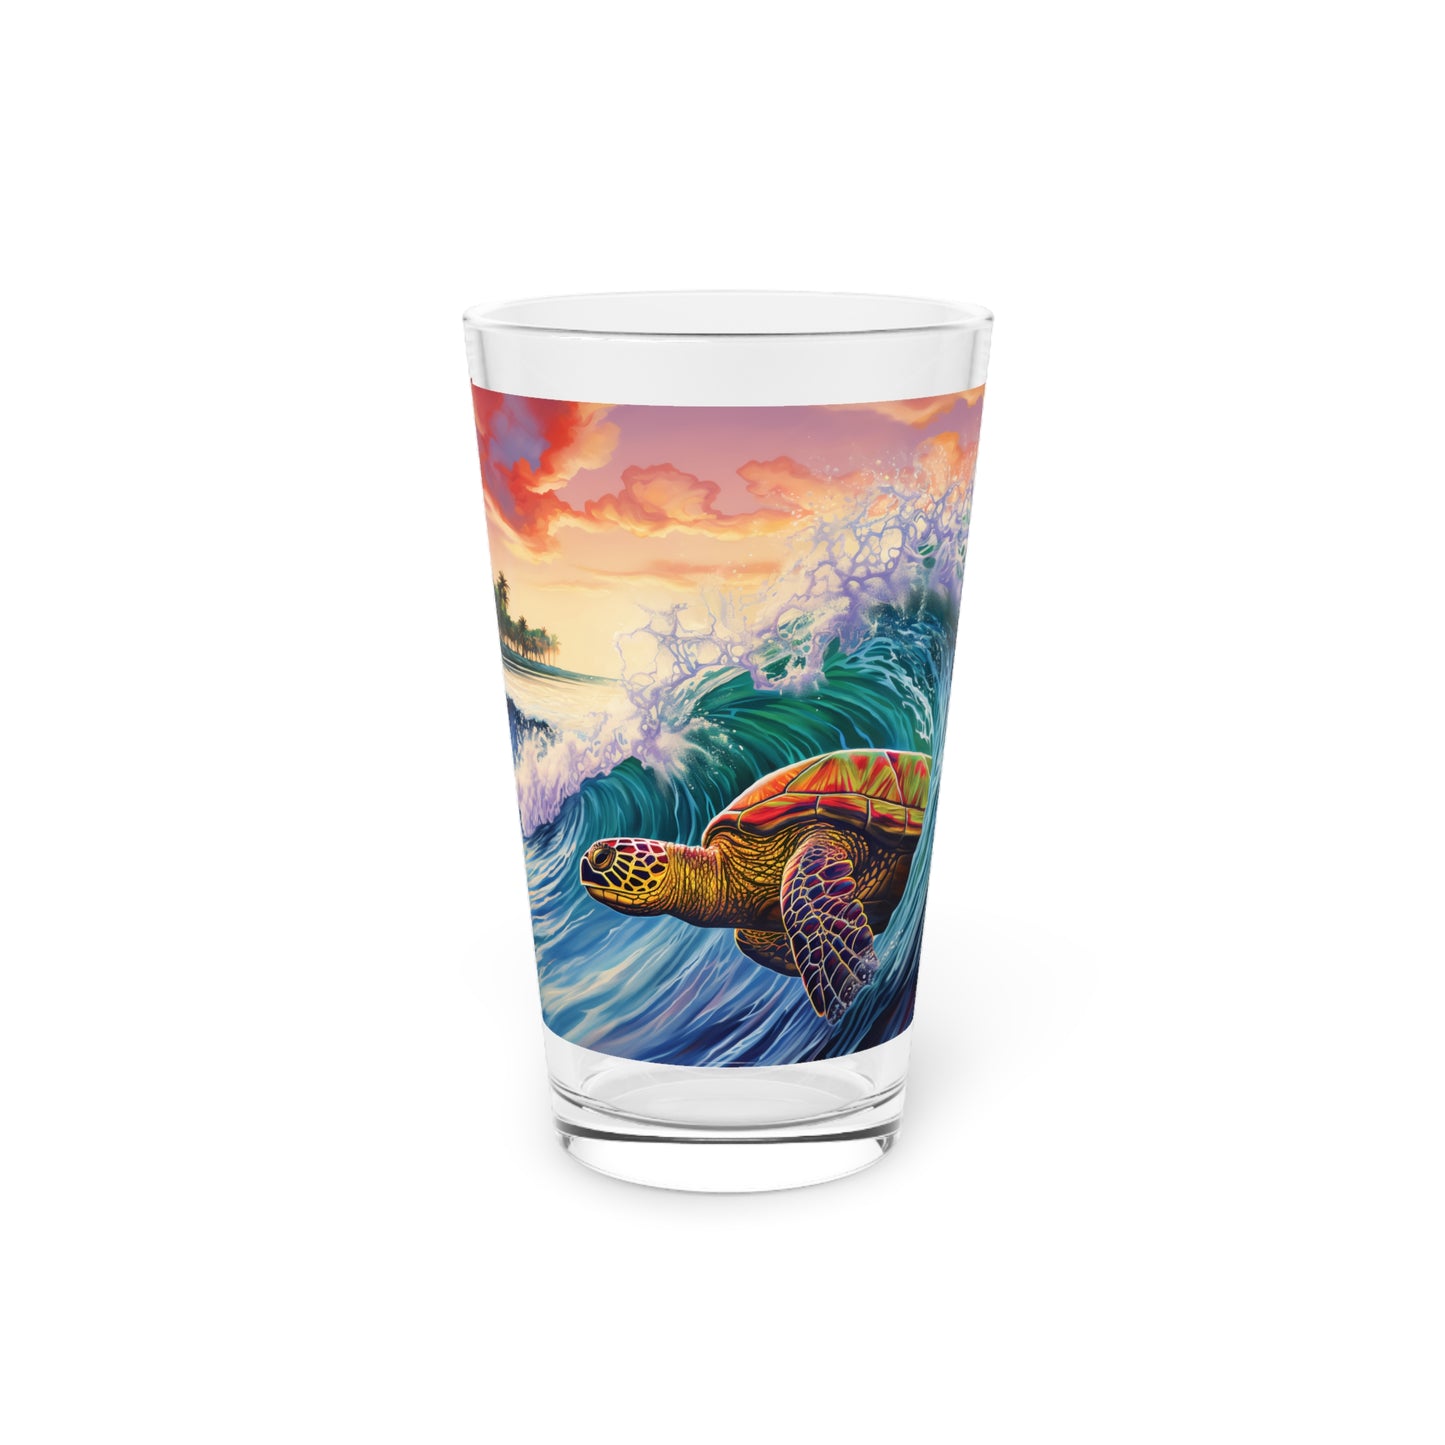 Dive into the spirit of Hawaii with our Turtle Surfing Waves Pint Glass, featuring Waves Design #009. This 16oz masterpiece by Stashbox captures the essence of tropical seas and the elegance of surfing turtles.